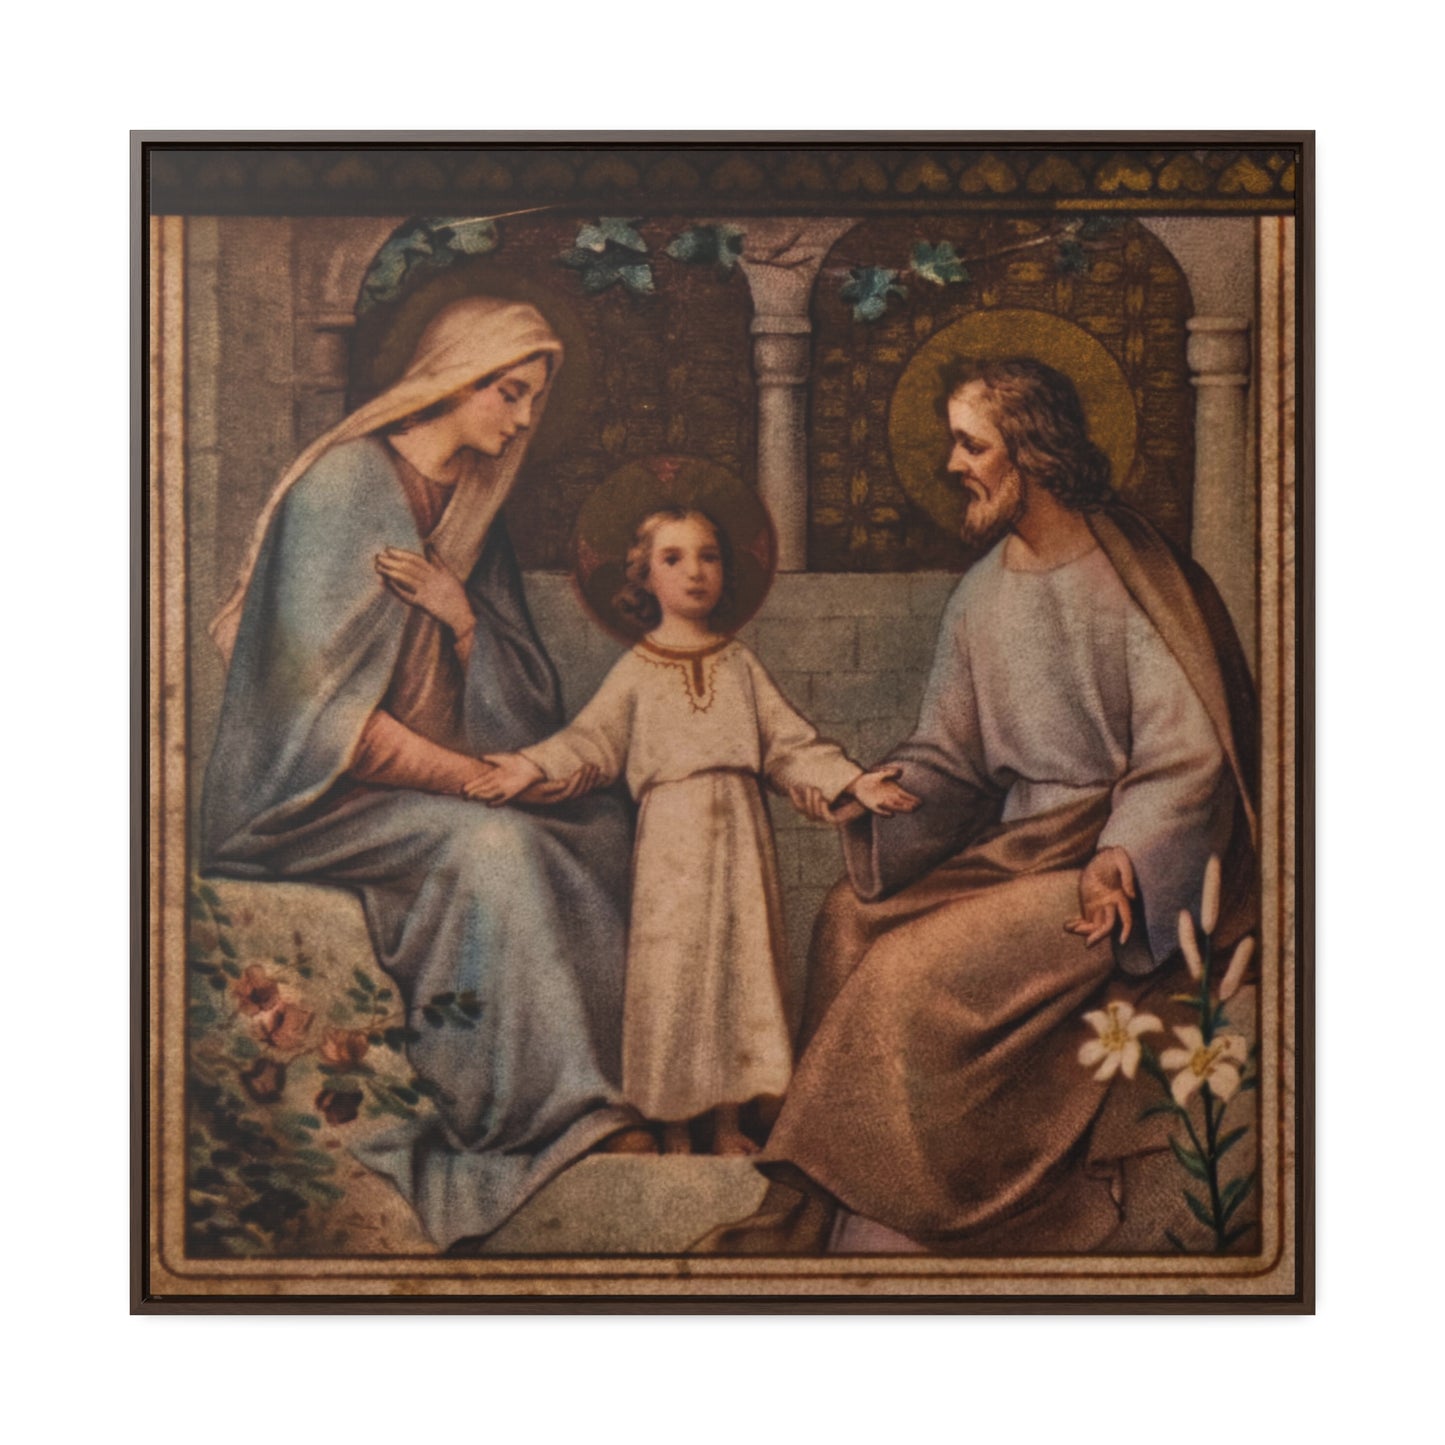 Holy Family - Framed Gallery Canvas Wrap - Sanctus Art Gallery